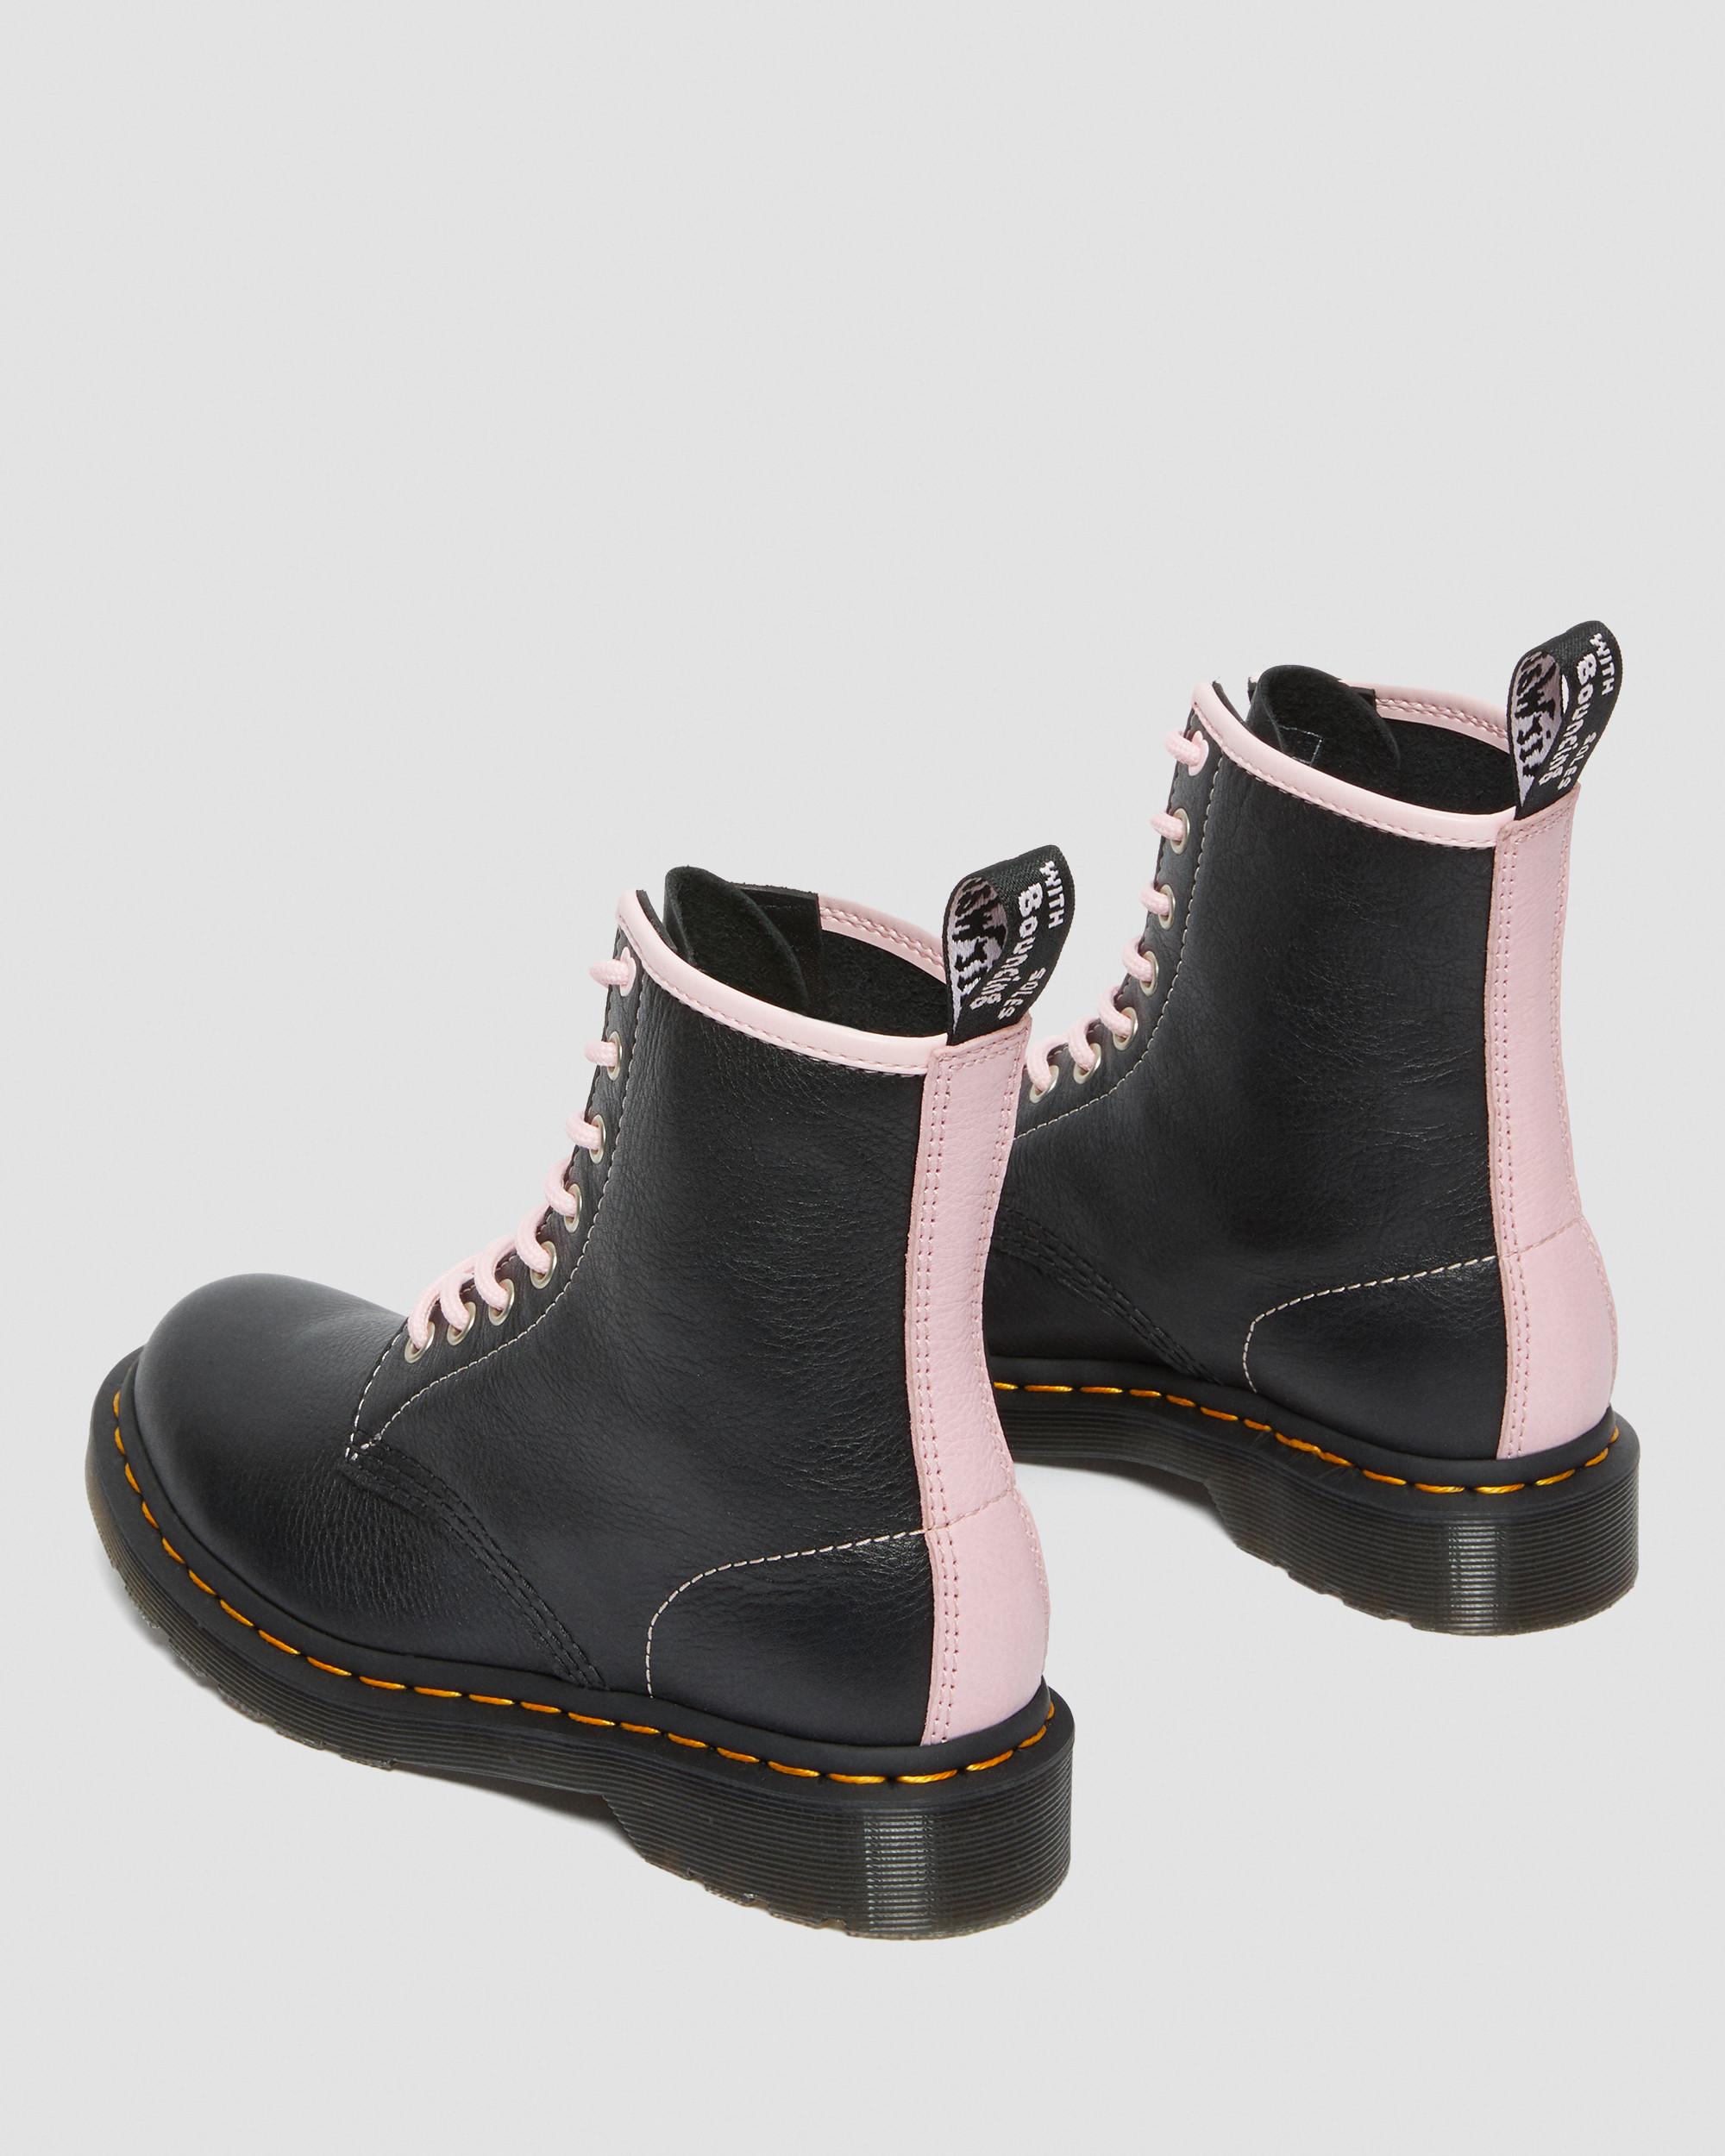 DR MARTENS 1460 Women's Contrast Leather Lace Up Boots